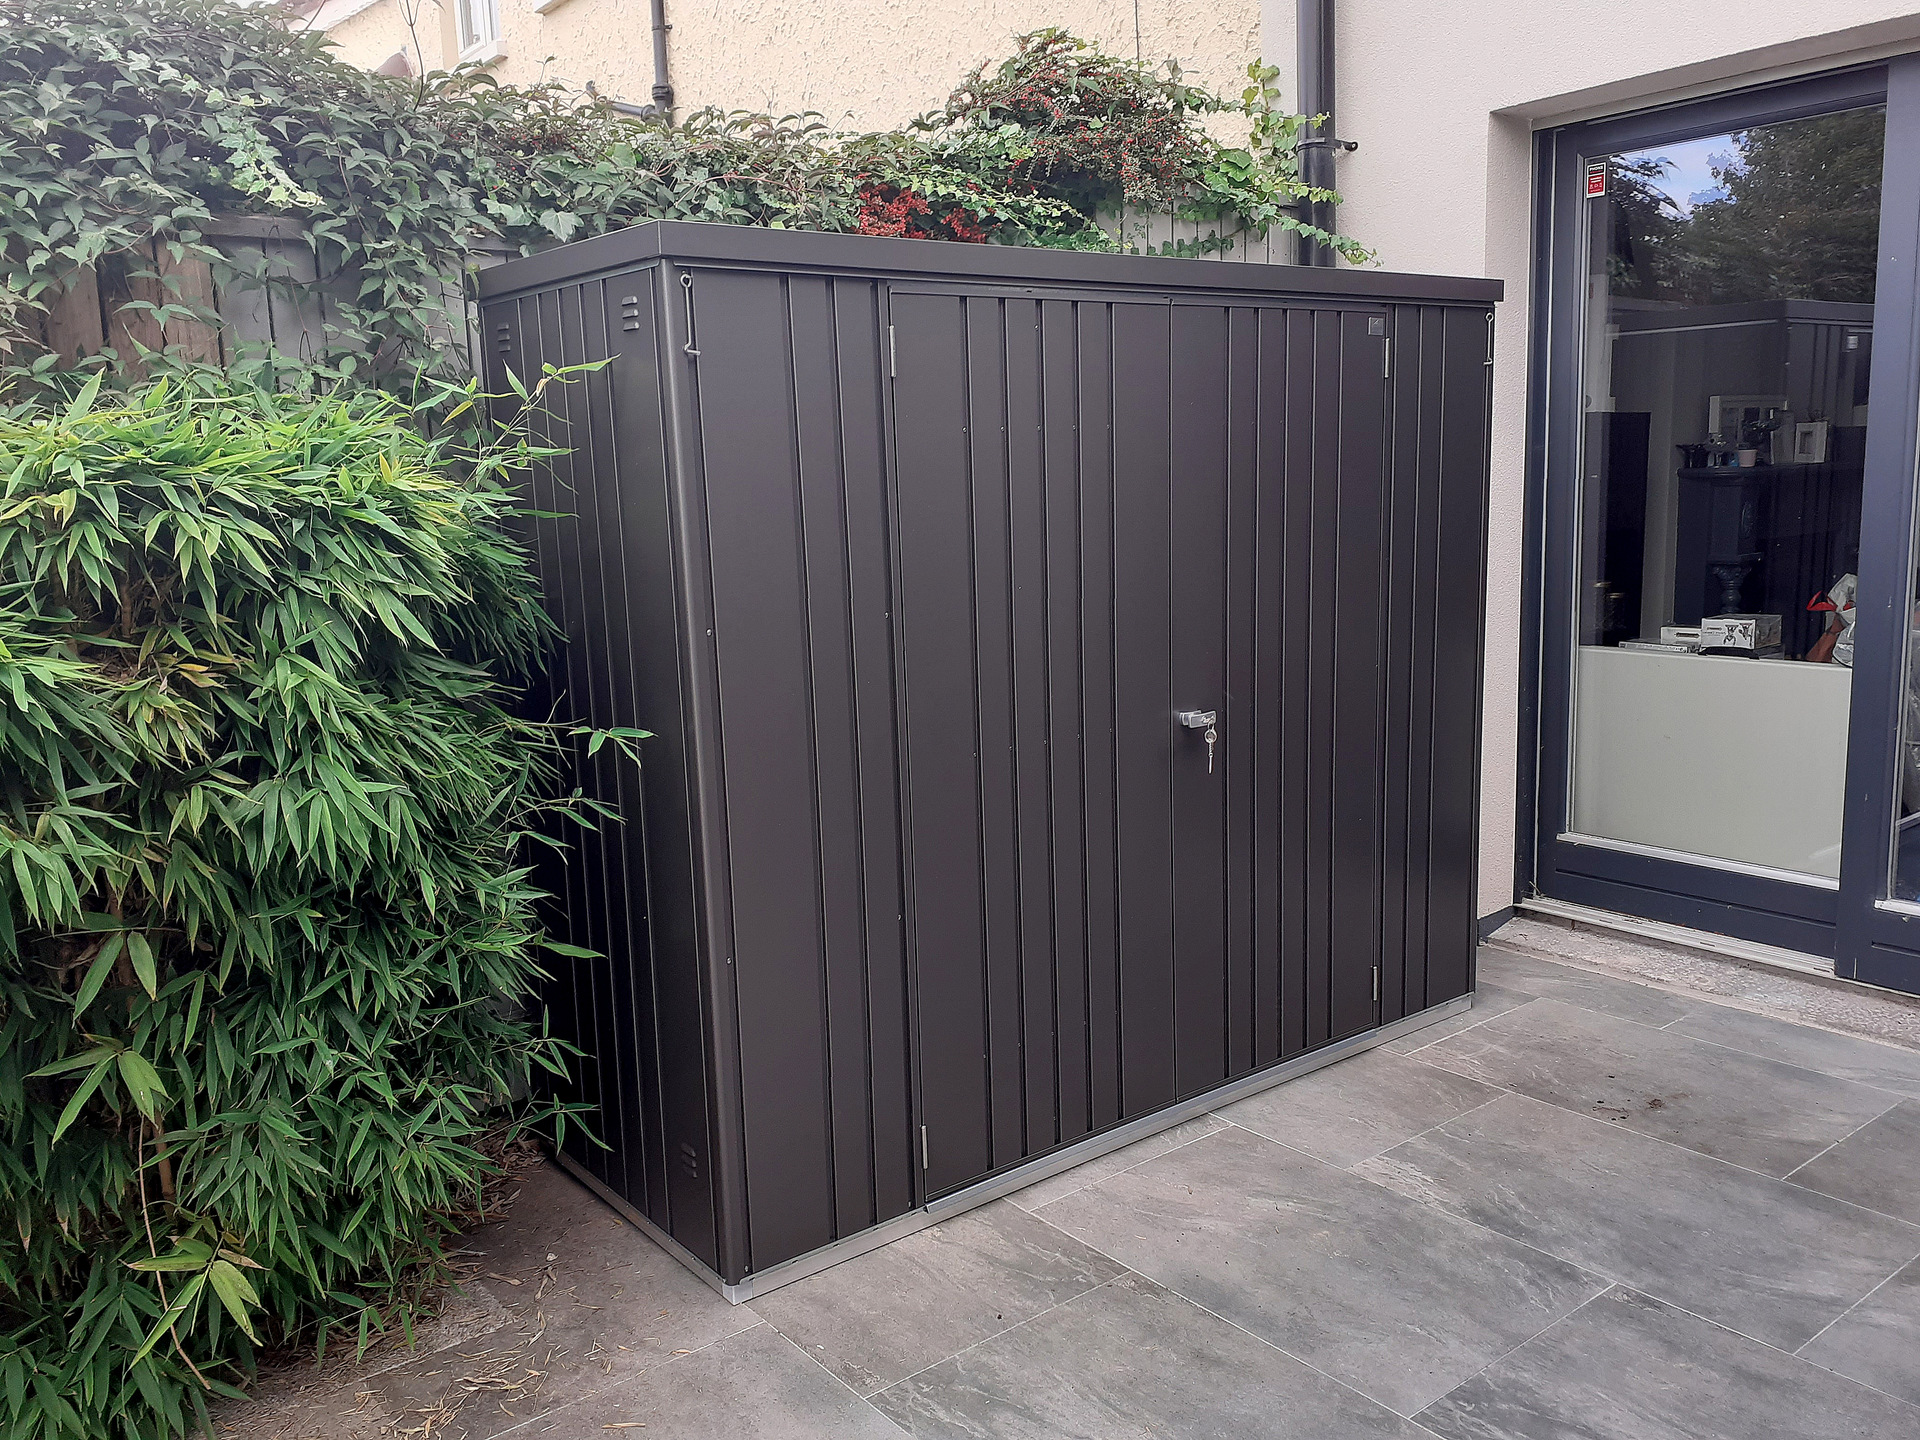 The superb quality and style of the Biohort Equipment Locker 230 in metallic dark grey  with optional accessories including aluminium floor frame, aluminium floor panels | supplied + installed in Terenure, Dublin 6W by Owen Chubb Landscapers. Tel 087-2306 128.